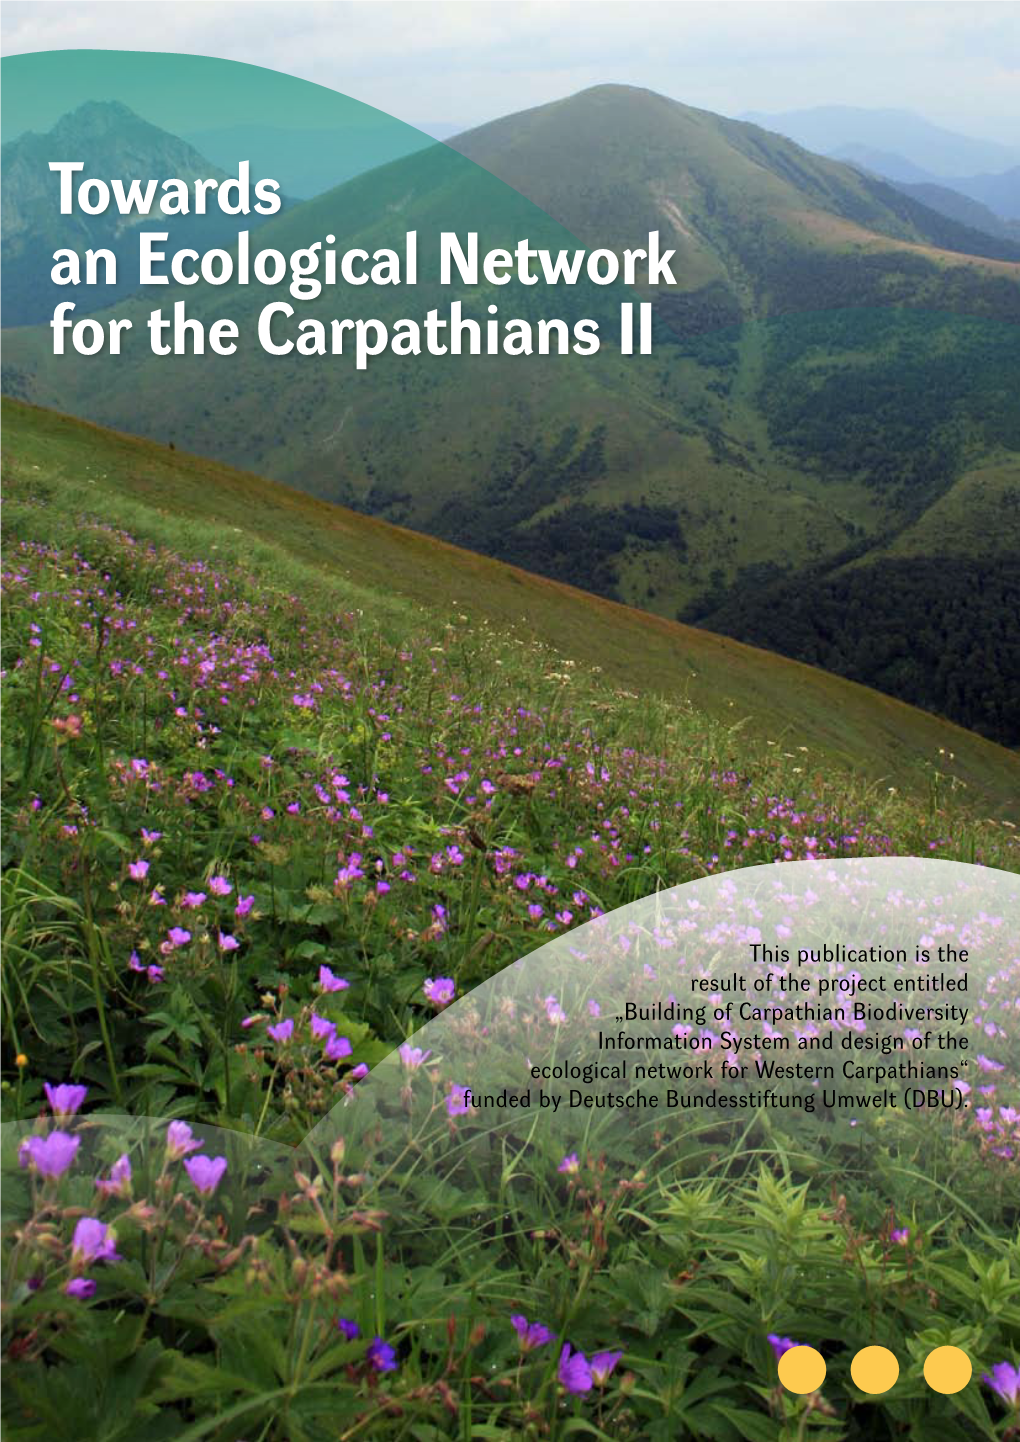 Towards an Ecological Network for the Carpathians II